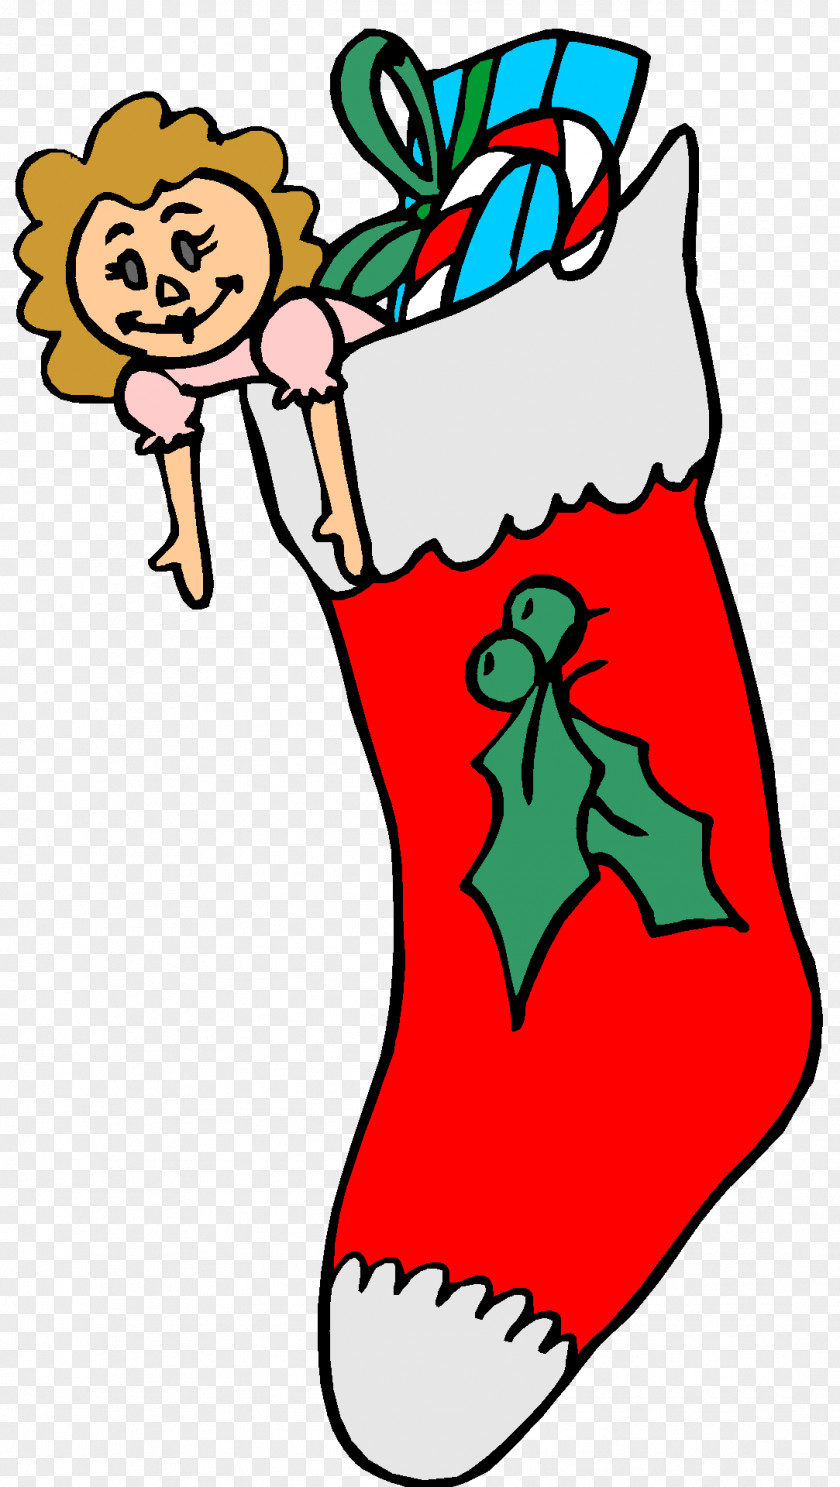 Christmas Stockings Clip Art PNG